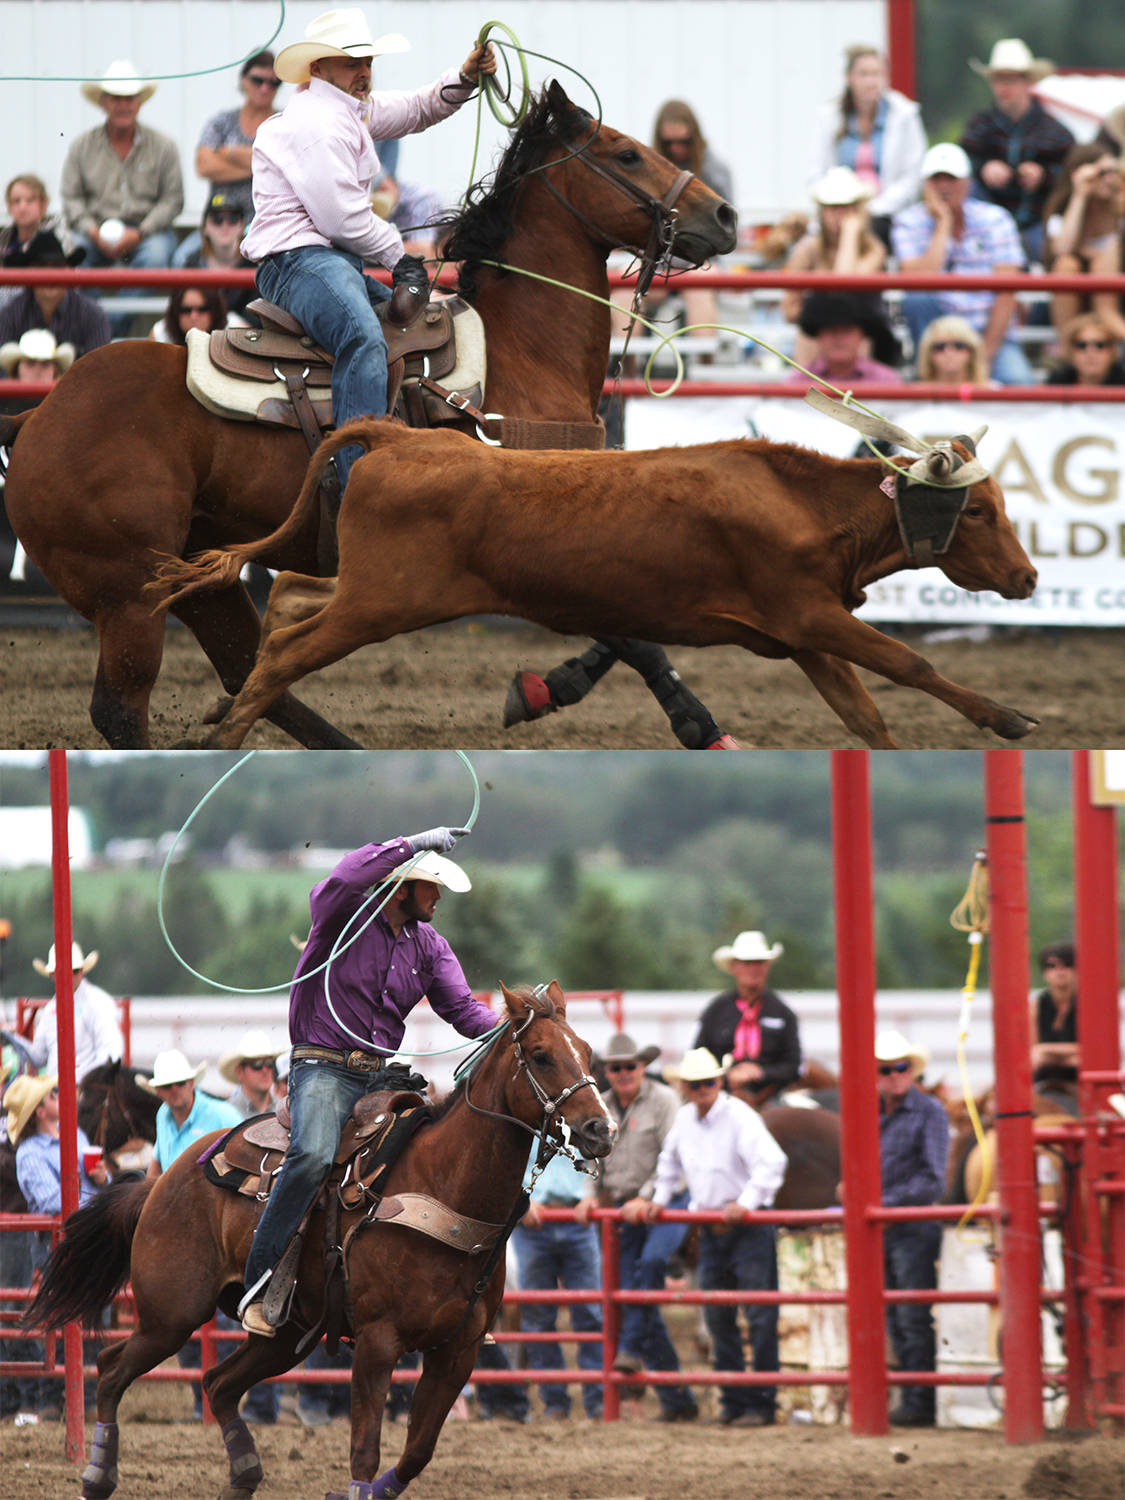 Ponoka and Lacombe team roping pair Tyrel Gordon (heeler) and Tel Flewelling also managed to remain in the top 12 with total time of 14.6 seconds, just behind Levi Simpson and Jeremy Buhler. These combined photos show Flewelling on the top and Gordon in the bottom frame.